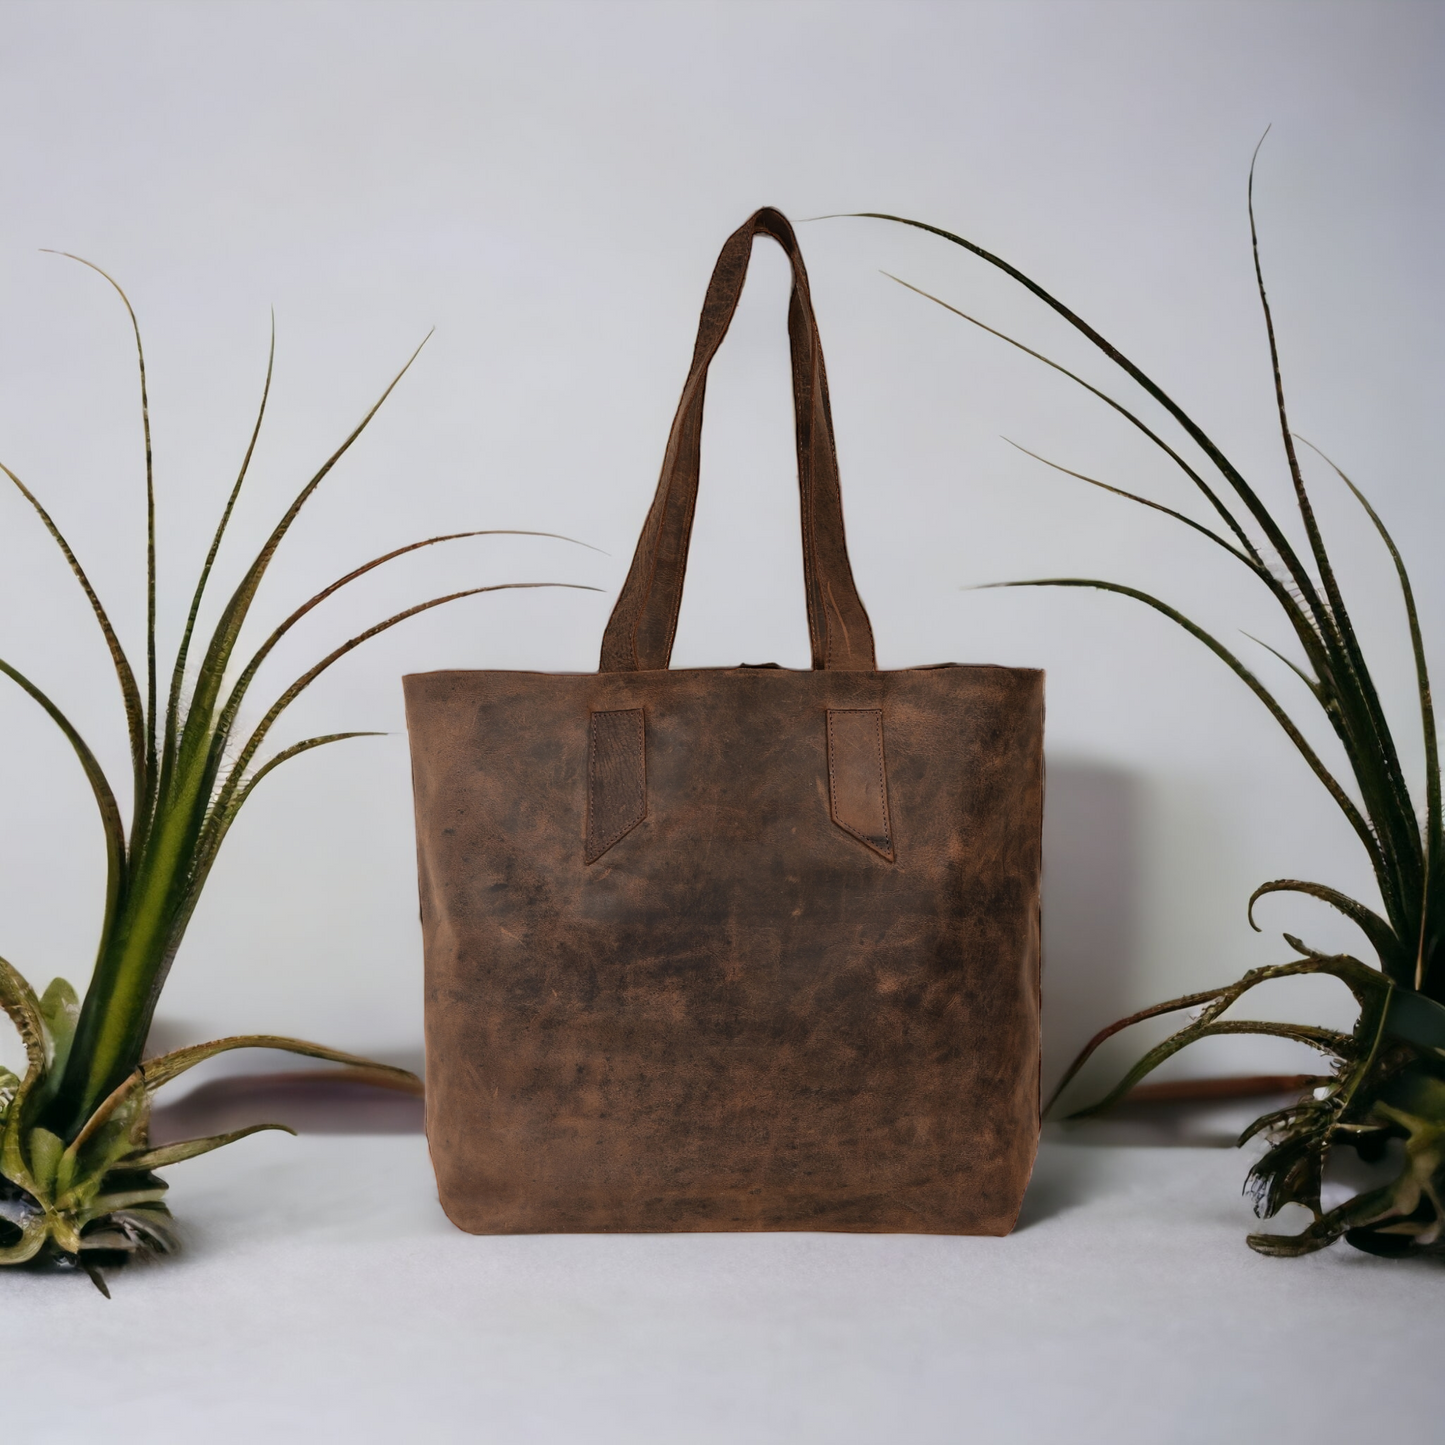 Dark Brown Leather Tote Bag Leather Purse for Women Raw edge Shopper Bag Large Leather Shopper Bag Everyday Tote Leather Shoulder Bag